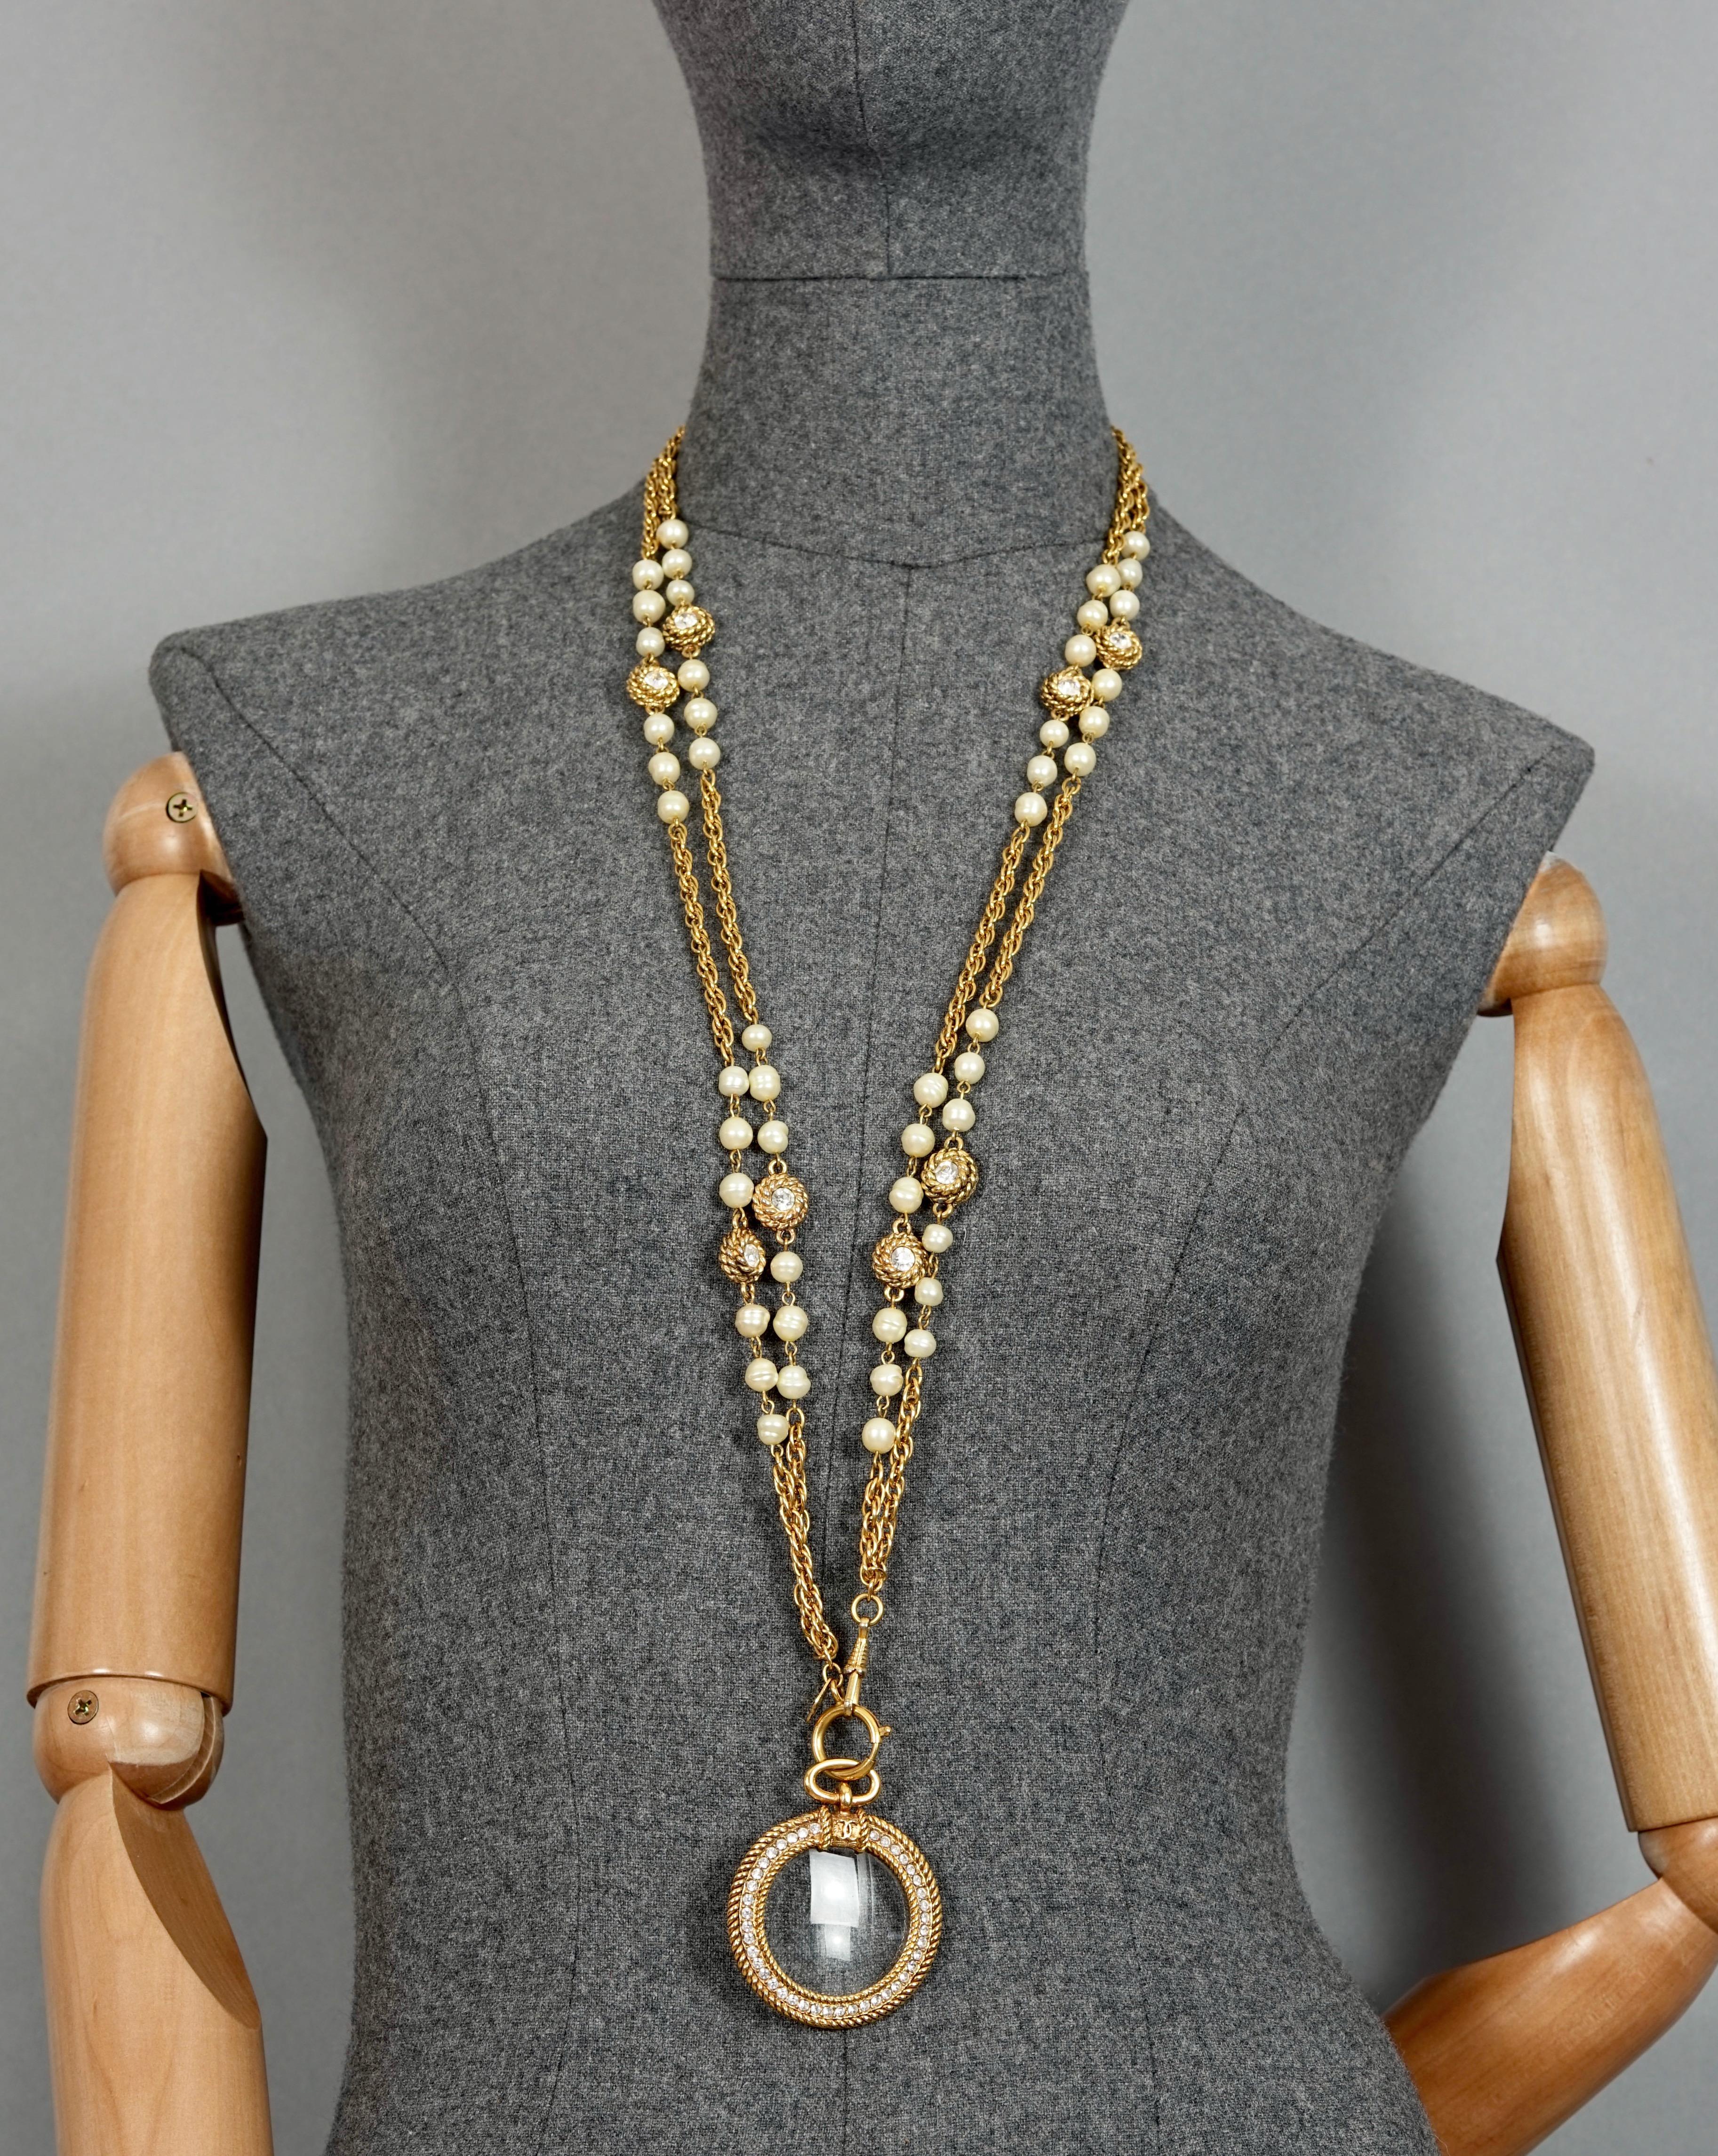 Vintage CHANEL Magnifying Glass Pearls Rhinestone Long Double Chain Necklace

Measurements:
Pendant Height: 2.95 inches (7.5 cm) with the pendant bail
Medallion Diameter: 1.97 inches (5 cm)
Total Length: 35.43 inches (90 cm)

Features:
- 100%